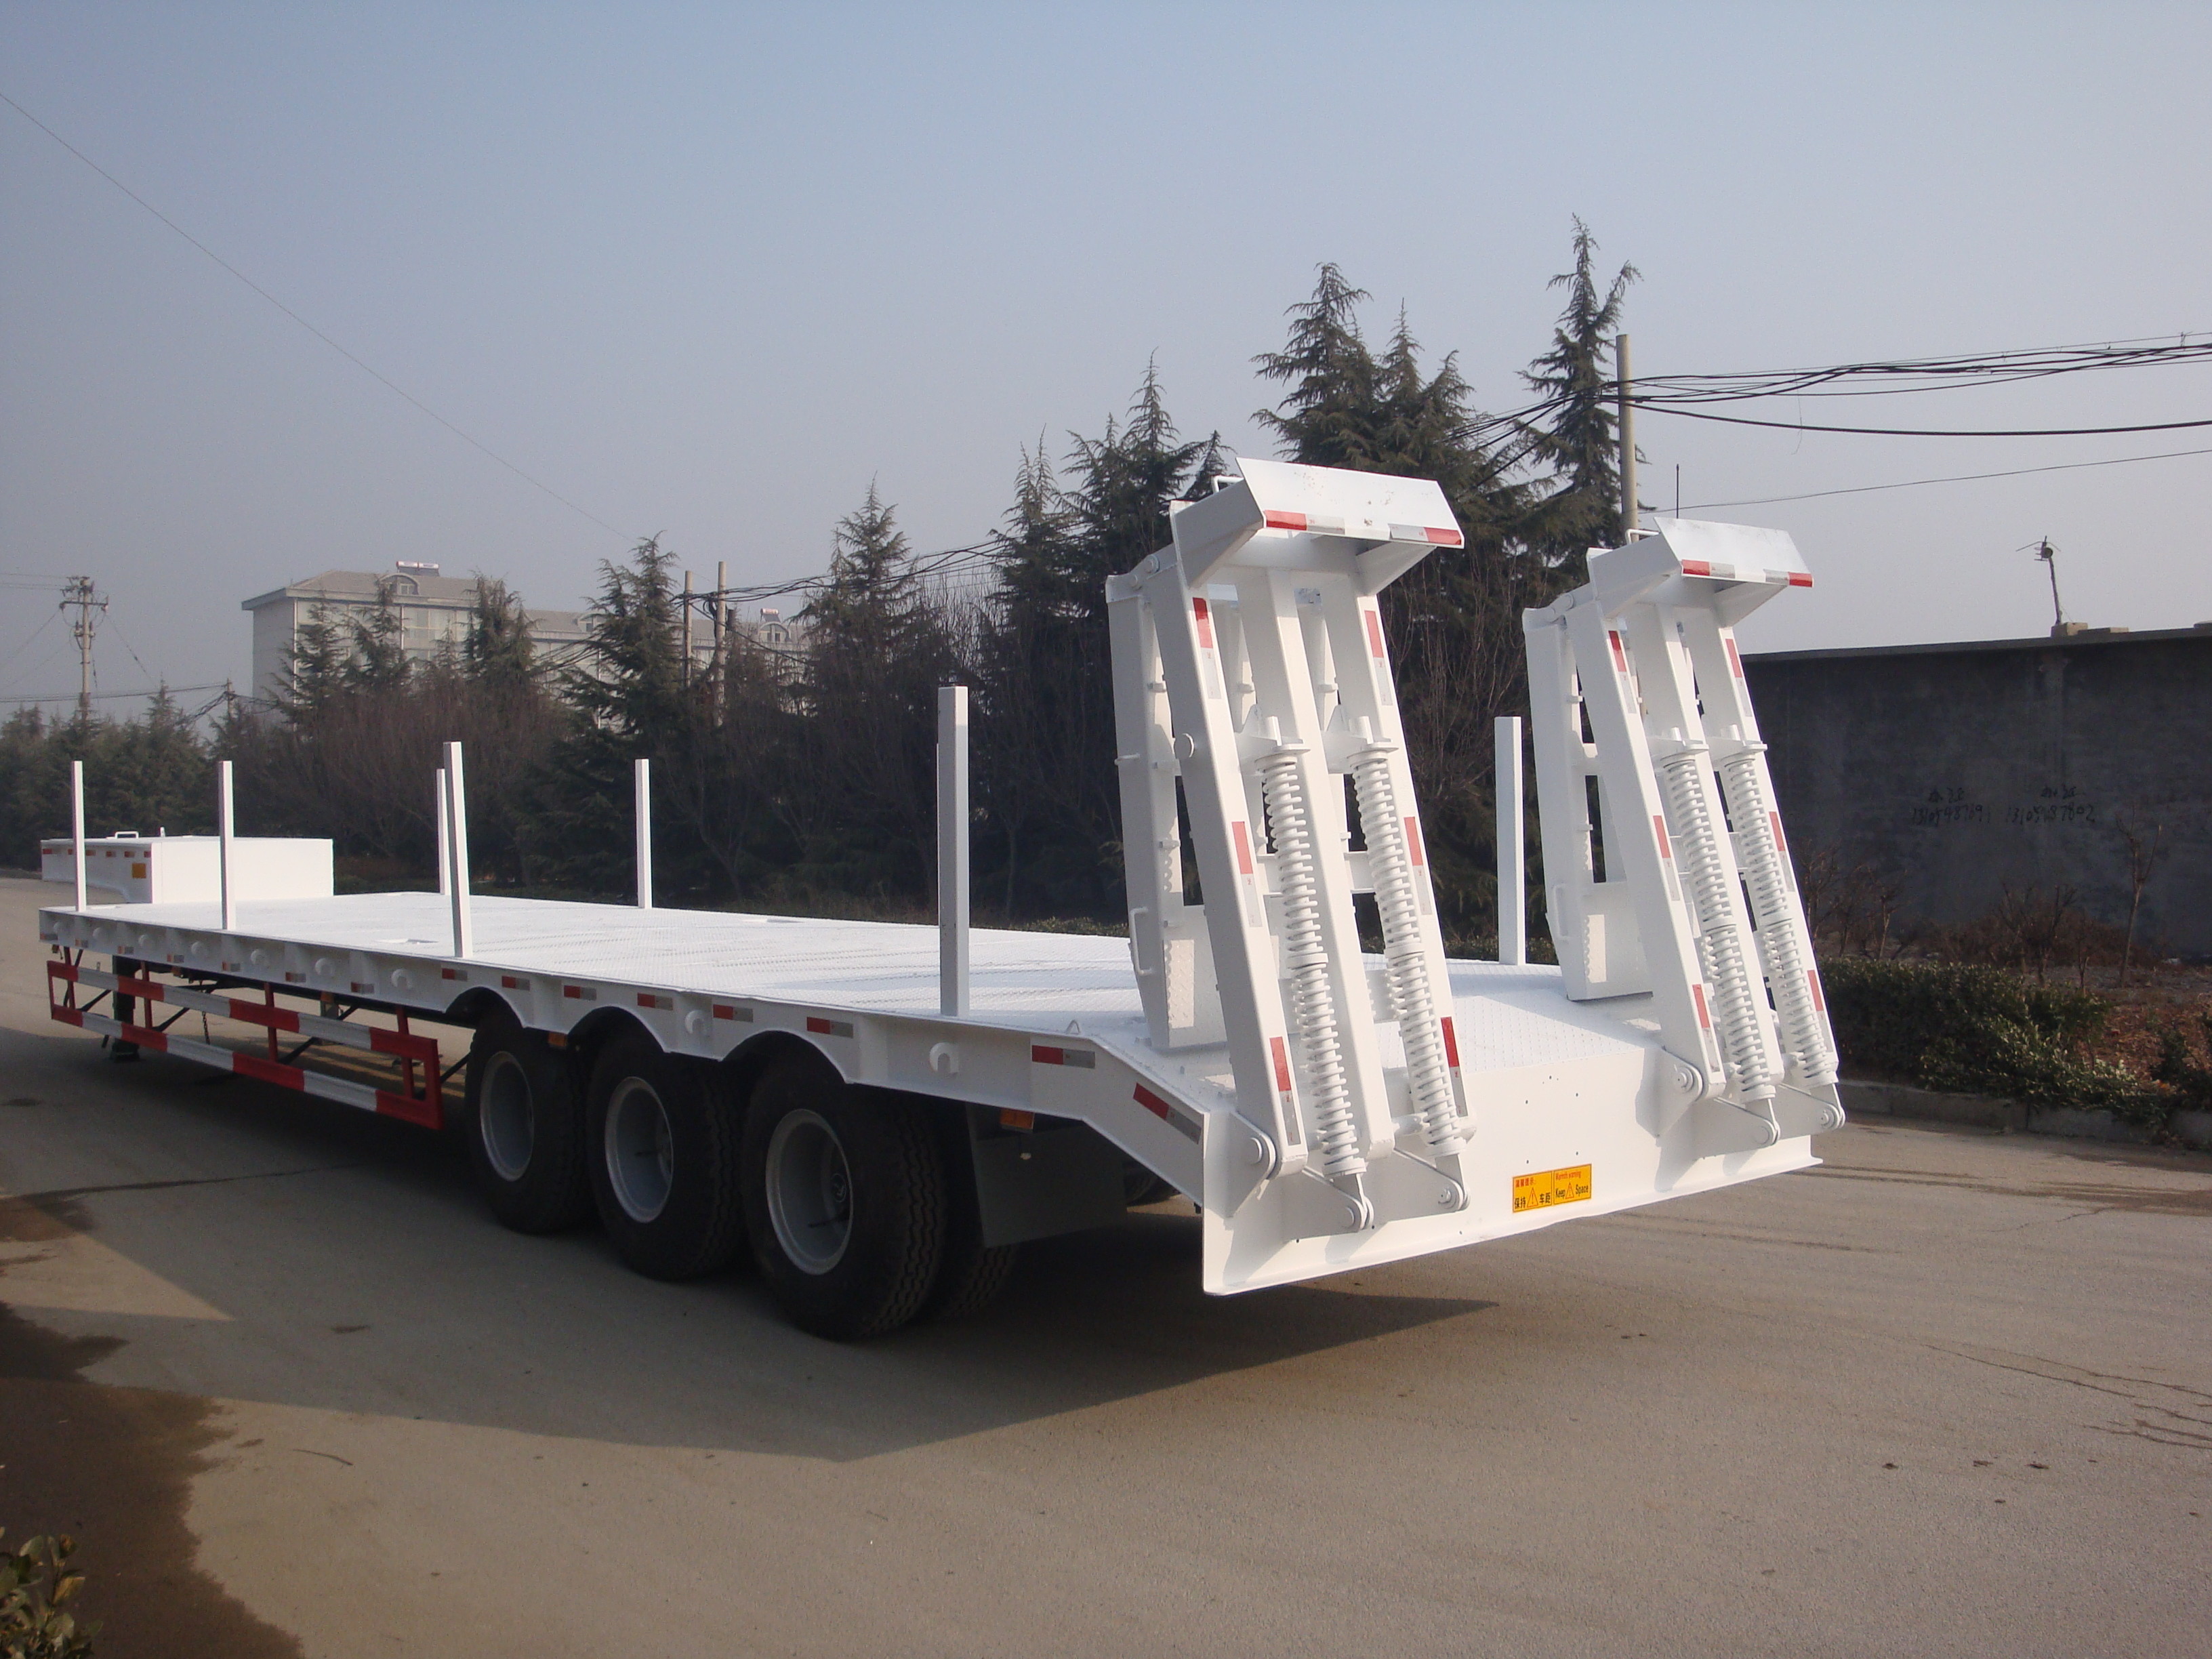 3 Axle 60 Ton Low Bed Semi Trailer , Heavy Duty Flatbed Trailer With Mechanical Suspension